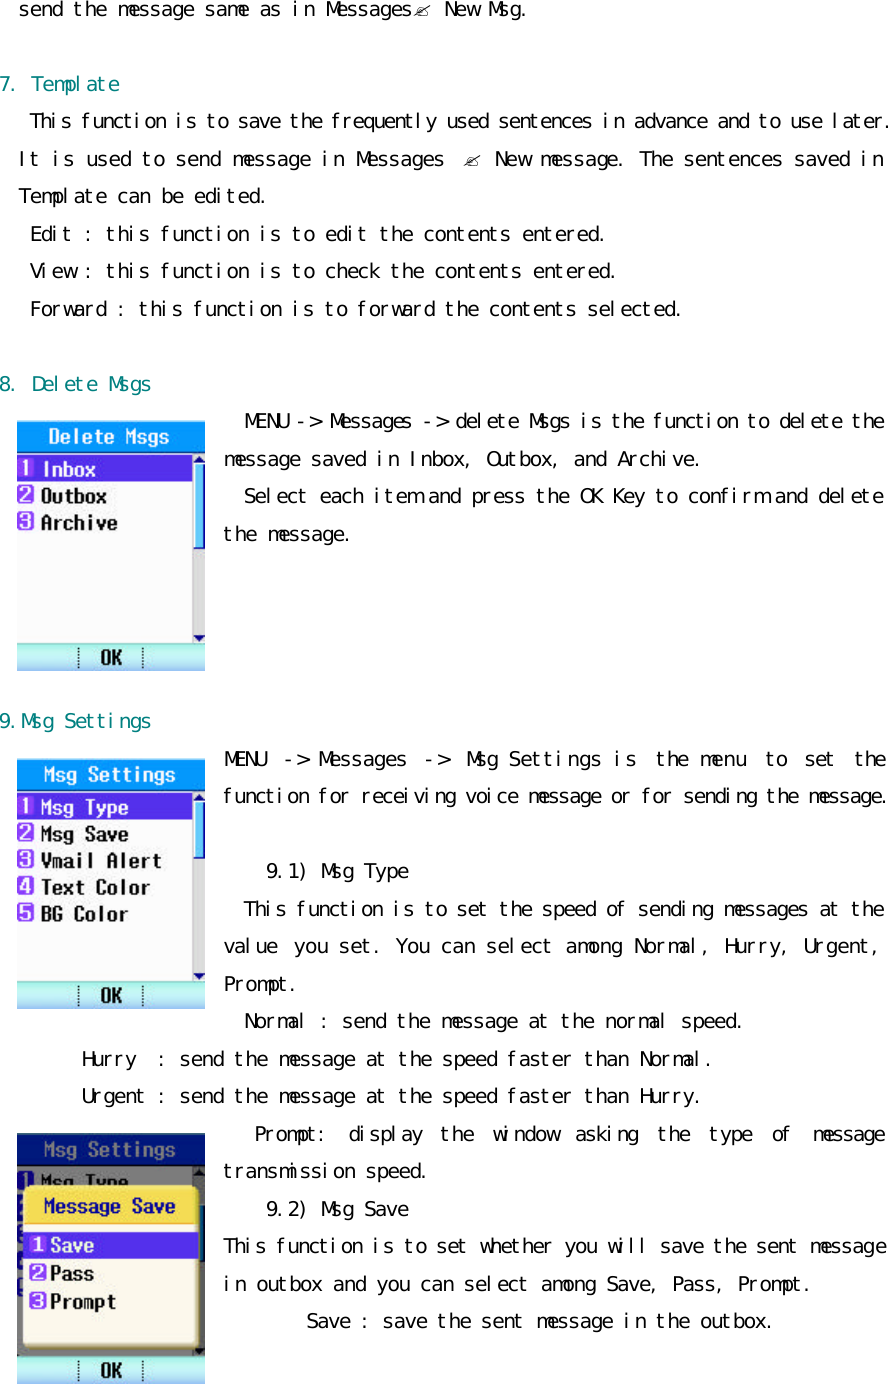 send the message same as in Messages? New Msg.  7. Template This function is to save the frequently used sentences in advance and to use later. It is used to send message in Messages  ? New message. The sentences saved in Template can be edited.  Edit : this function is to edit the contents entered.  View : this function is to check the contents entered.  Forward : this function is to forward the contents selected.   8. Delete Msgs MENU -&gt; Messages -&gt; delete Msgs is the function to delete the message saved in Inbox, Outbox, and Archive. Select each item and press the OK Key to confirm and delete the message.      9.Msg Settings MENU  -&gt; Messages  -&gt; Msg Settings is the menu to set the function for receiving voice message or for sending the message.   9.1) Msg Type This function is to set the speed of sending messages at the value you set. You can select among Normal, Hurry, Urgent, Prompt. Normal : send the message at the normal speed.  Hurry  : send the message at the speed faster than Normal. Urgent : send the message at the speed faster than Hurry.  Prompt: display the window asking the type of message transmission speed.  9.2) Msg Save This function is to set whether you will save the sent message in outbox and you can select among Save, Pass, Prompt. Save : save the sent message in the outbox. 